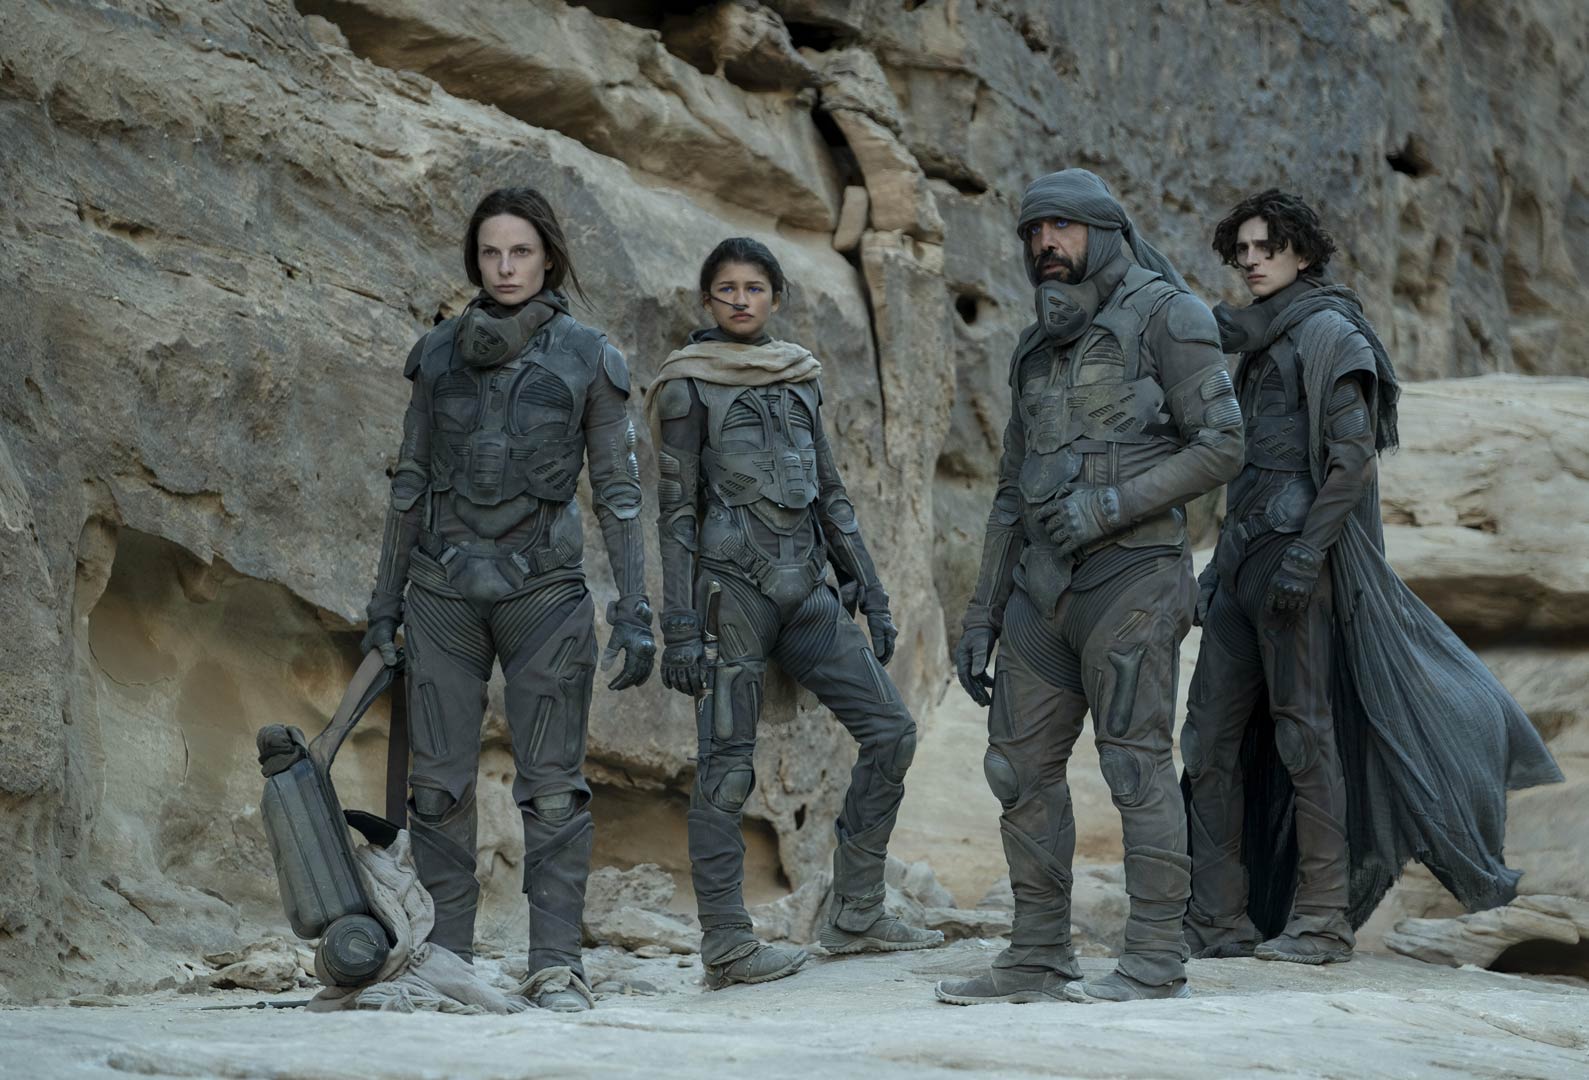 House Atreides survivors, Paul and Jessica, together with the Fremen, Stilgar and Chani, in the Dune movie.